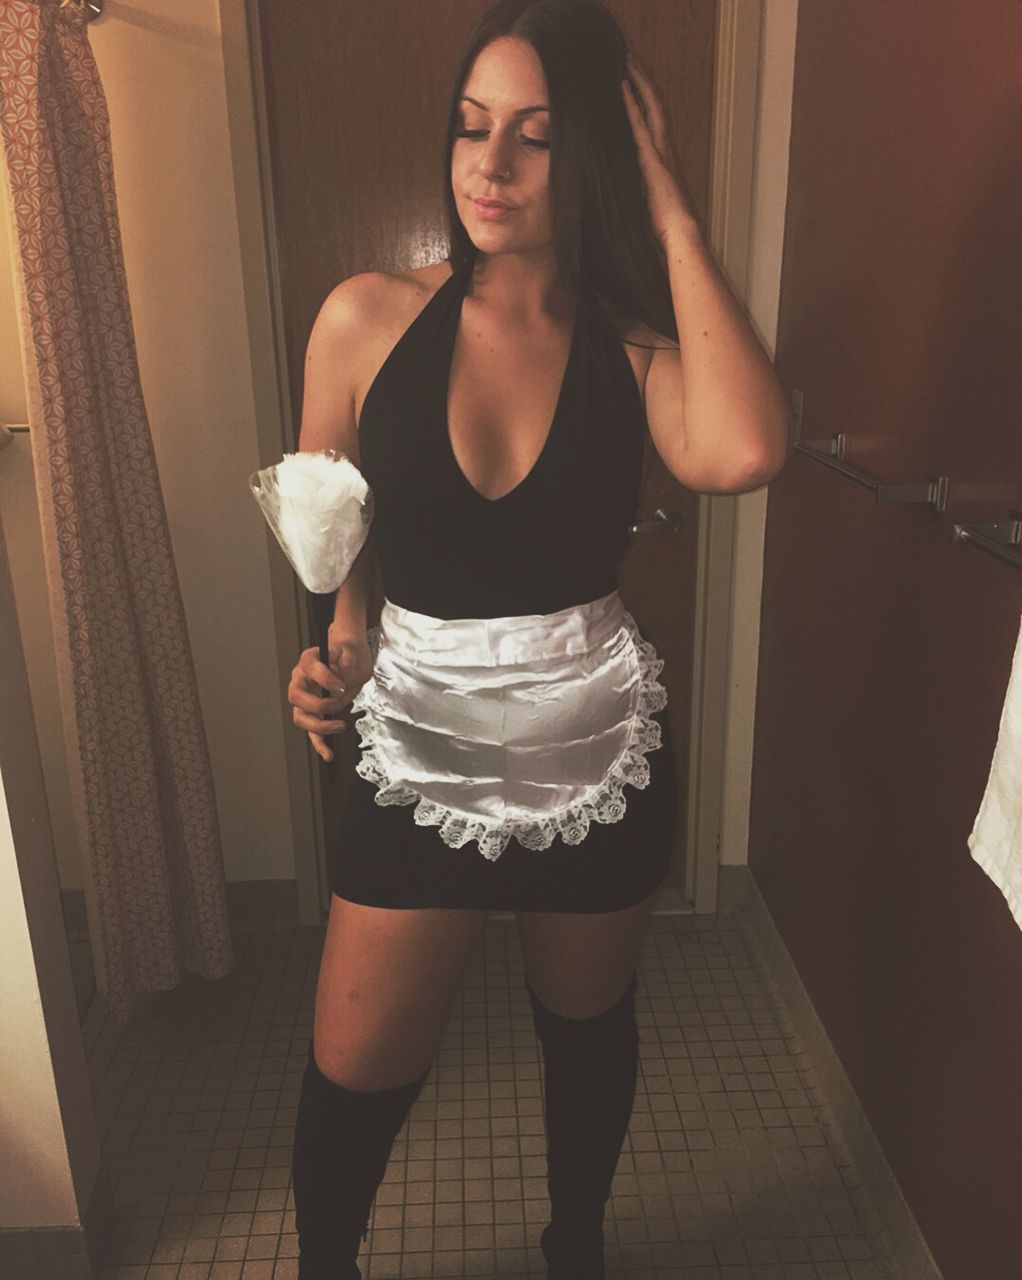 10 College Halloween Costumes That You'll Love! Easy DIY College Costumes perfect for freshman or . seniors alike! Easy and Creative College Costumes! Halloween costume women cute! Halloween costume woman sexy! Whatever you you want, you can find it here for halloweekend! #halloween #college 